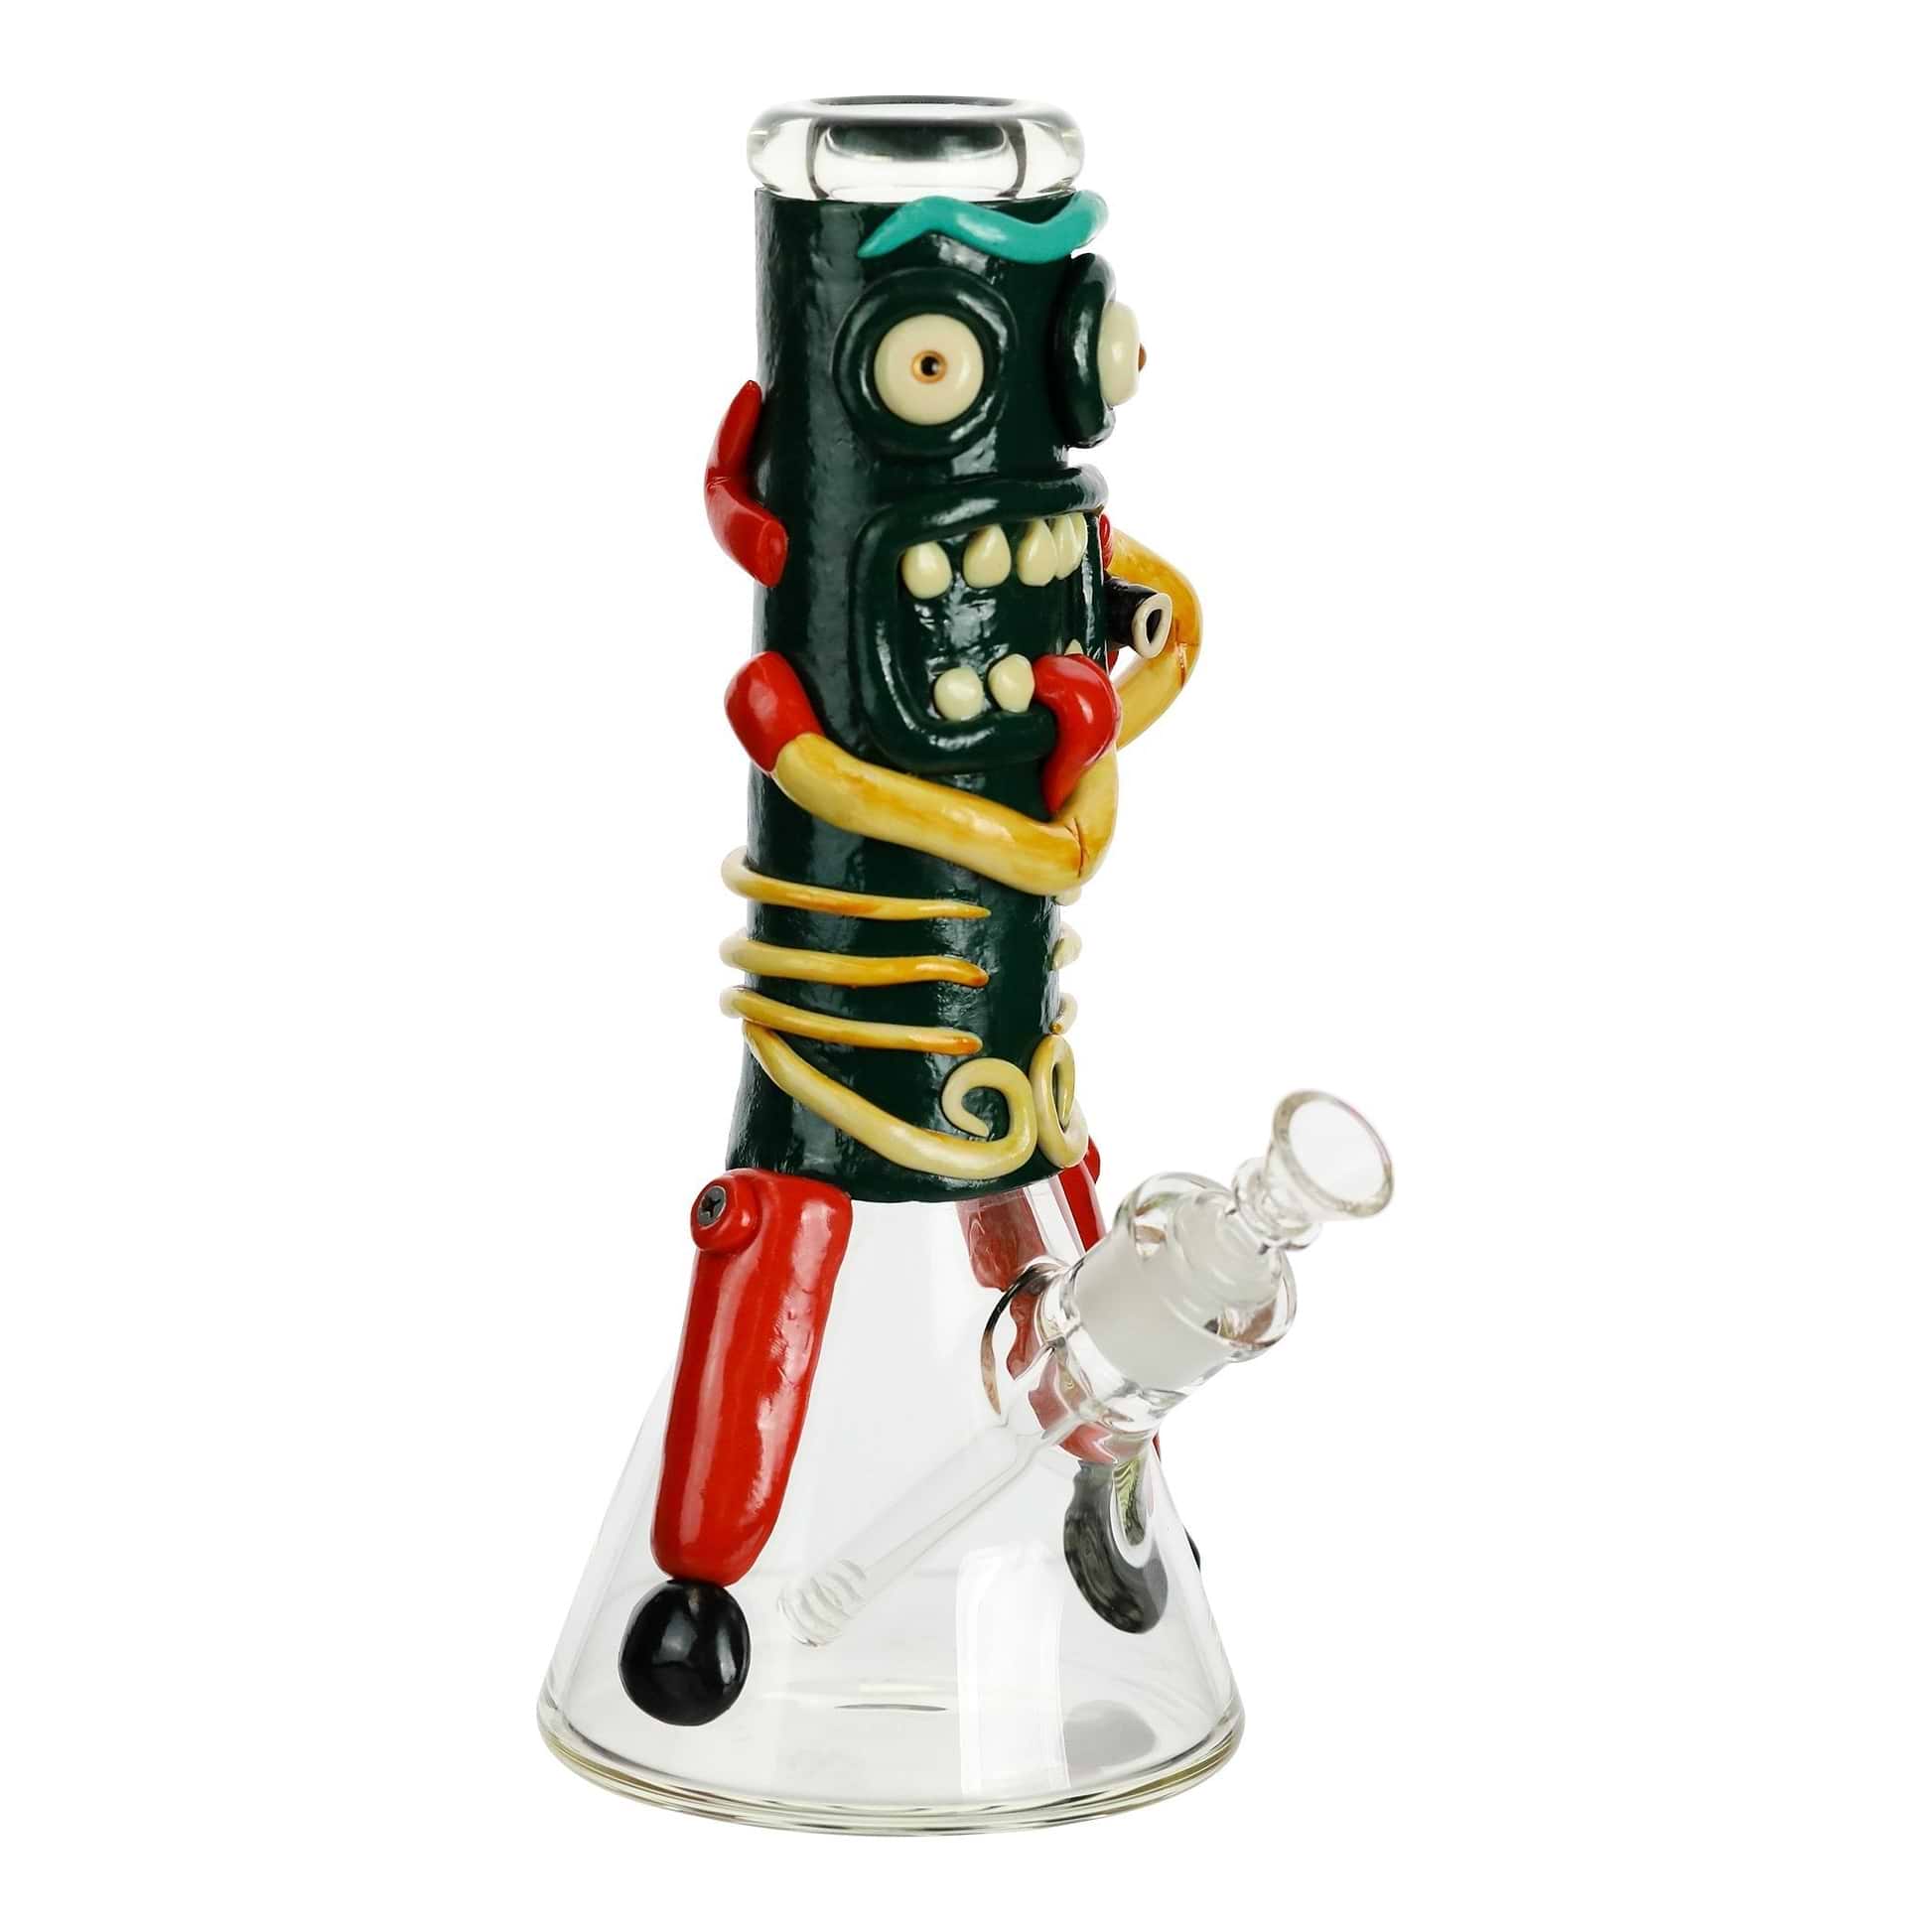 Glowing Mythical Protector Bong - 12.5in